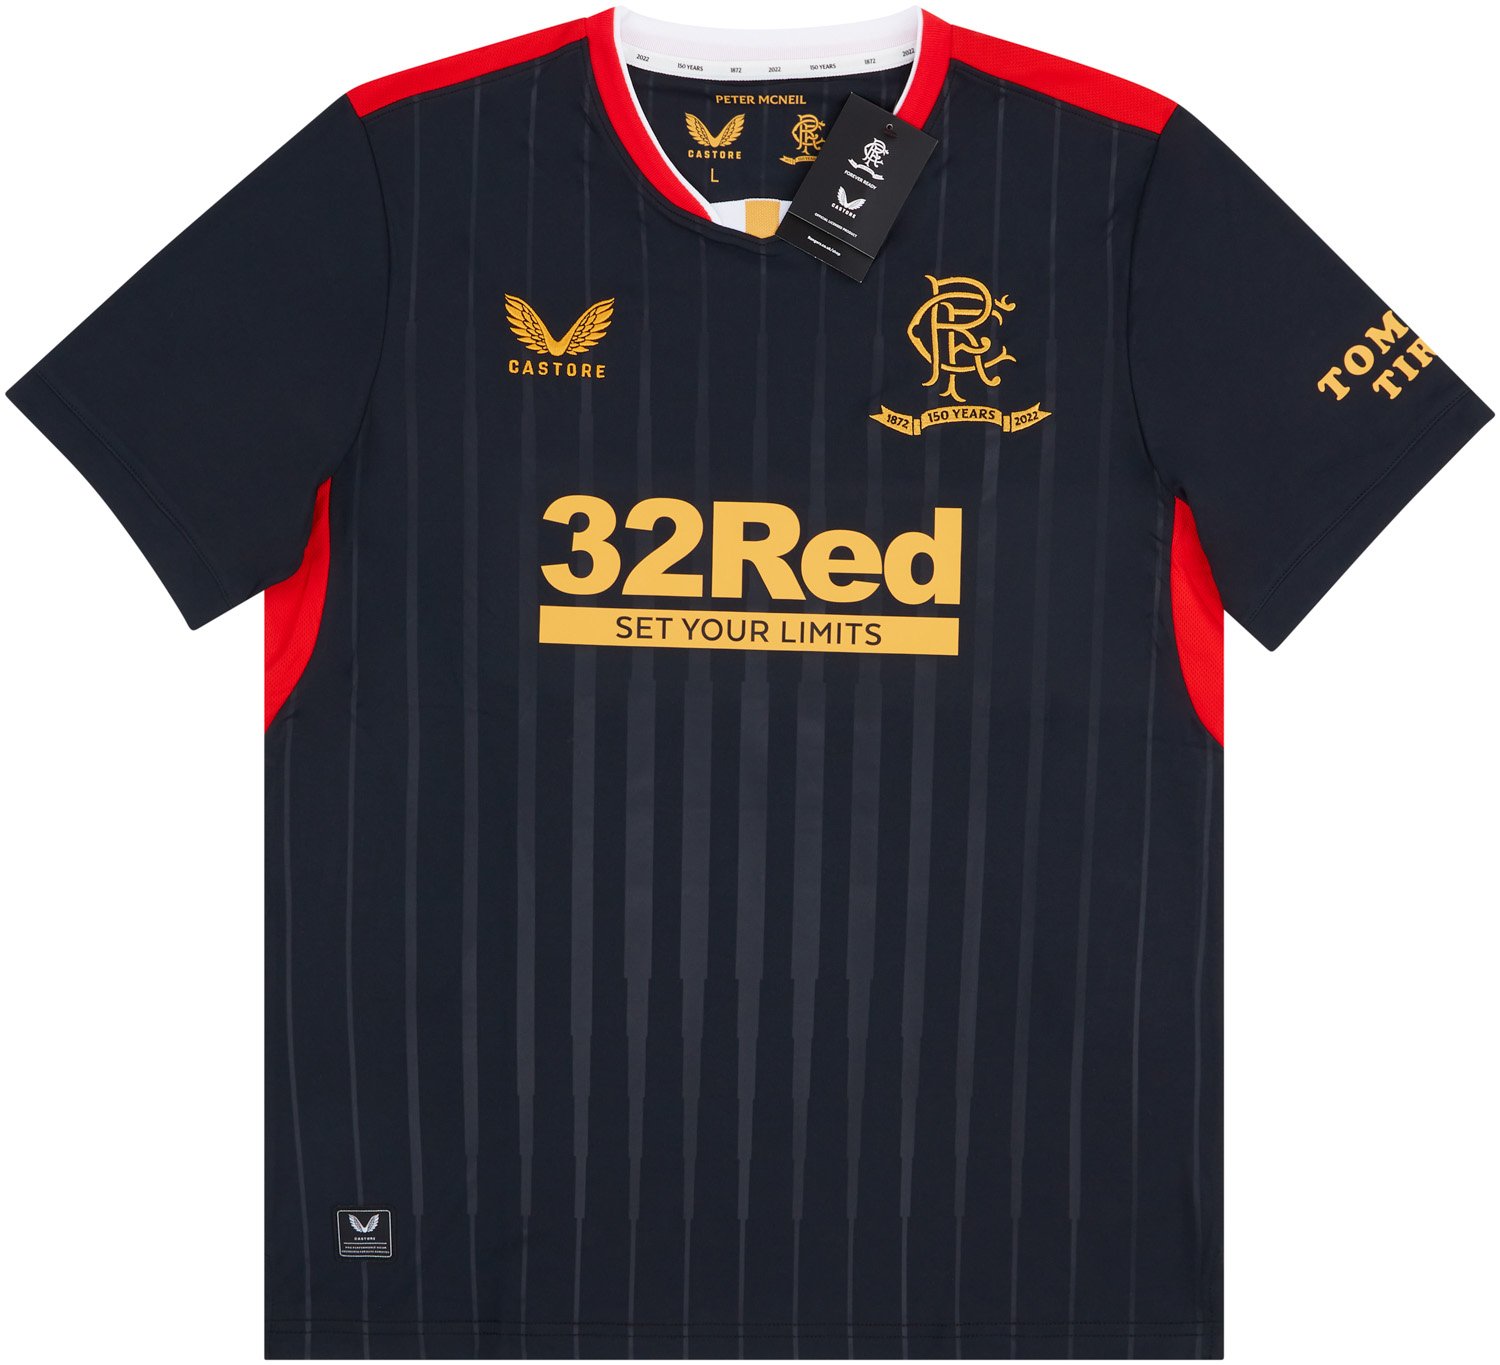 Castore Rangers 20-21 Home, Away & Third Kits Released - Footy